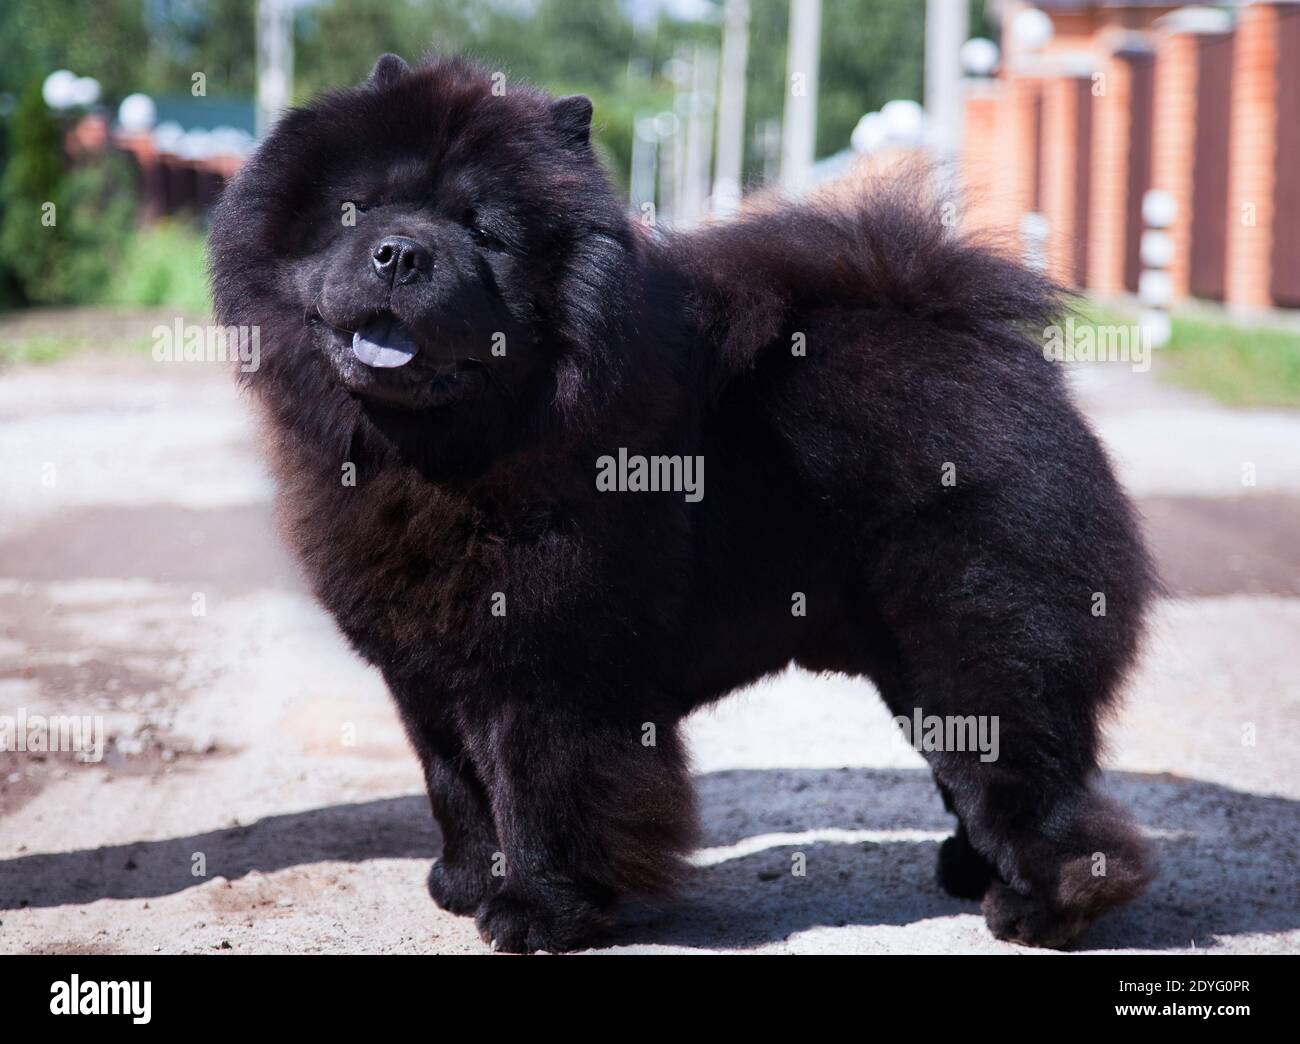 A large black shaggy dog of the Chow Chow breed, with open mouth and sticking out blue tongue, stands on the track Stock Photo